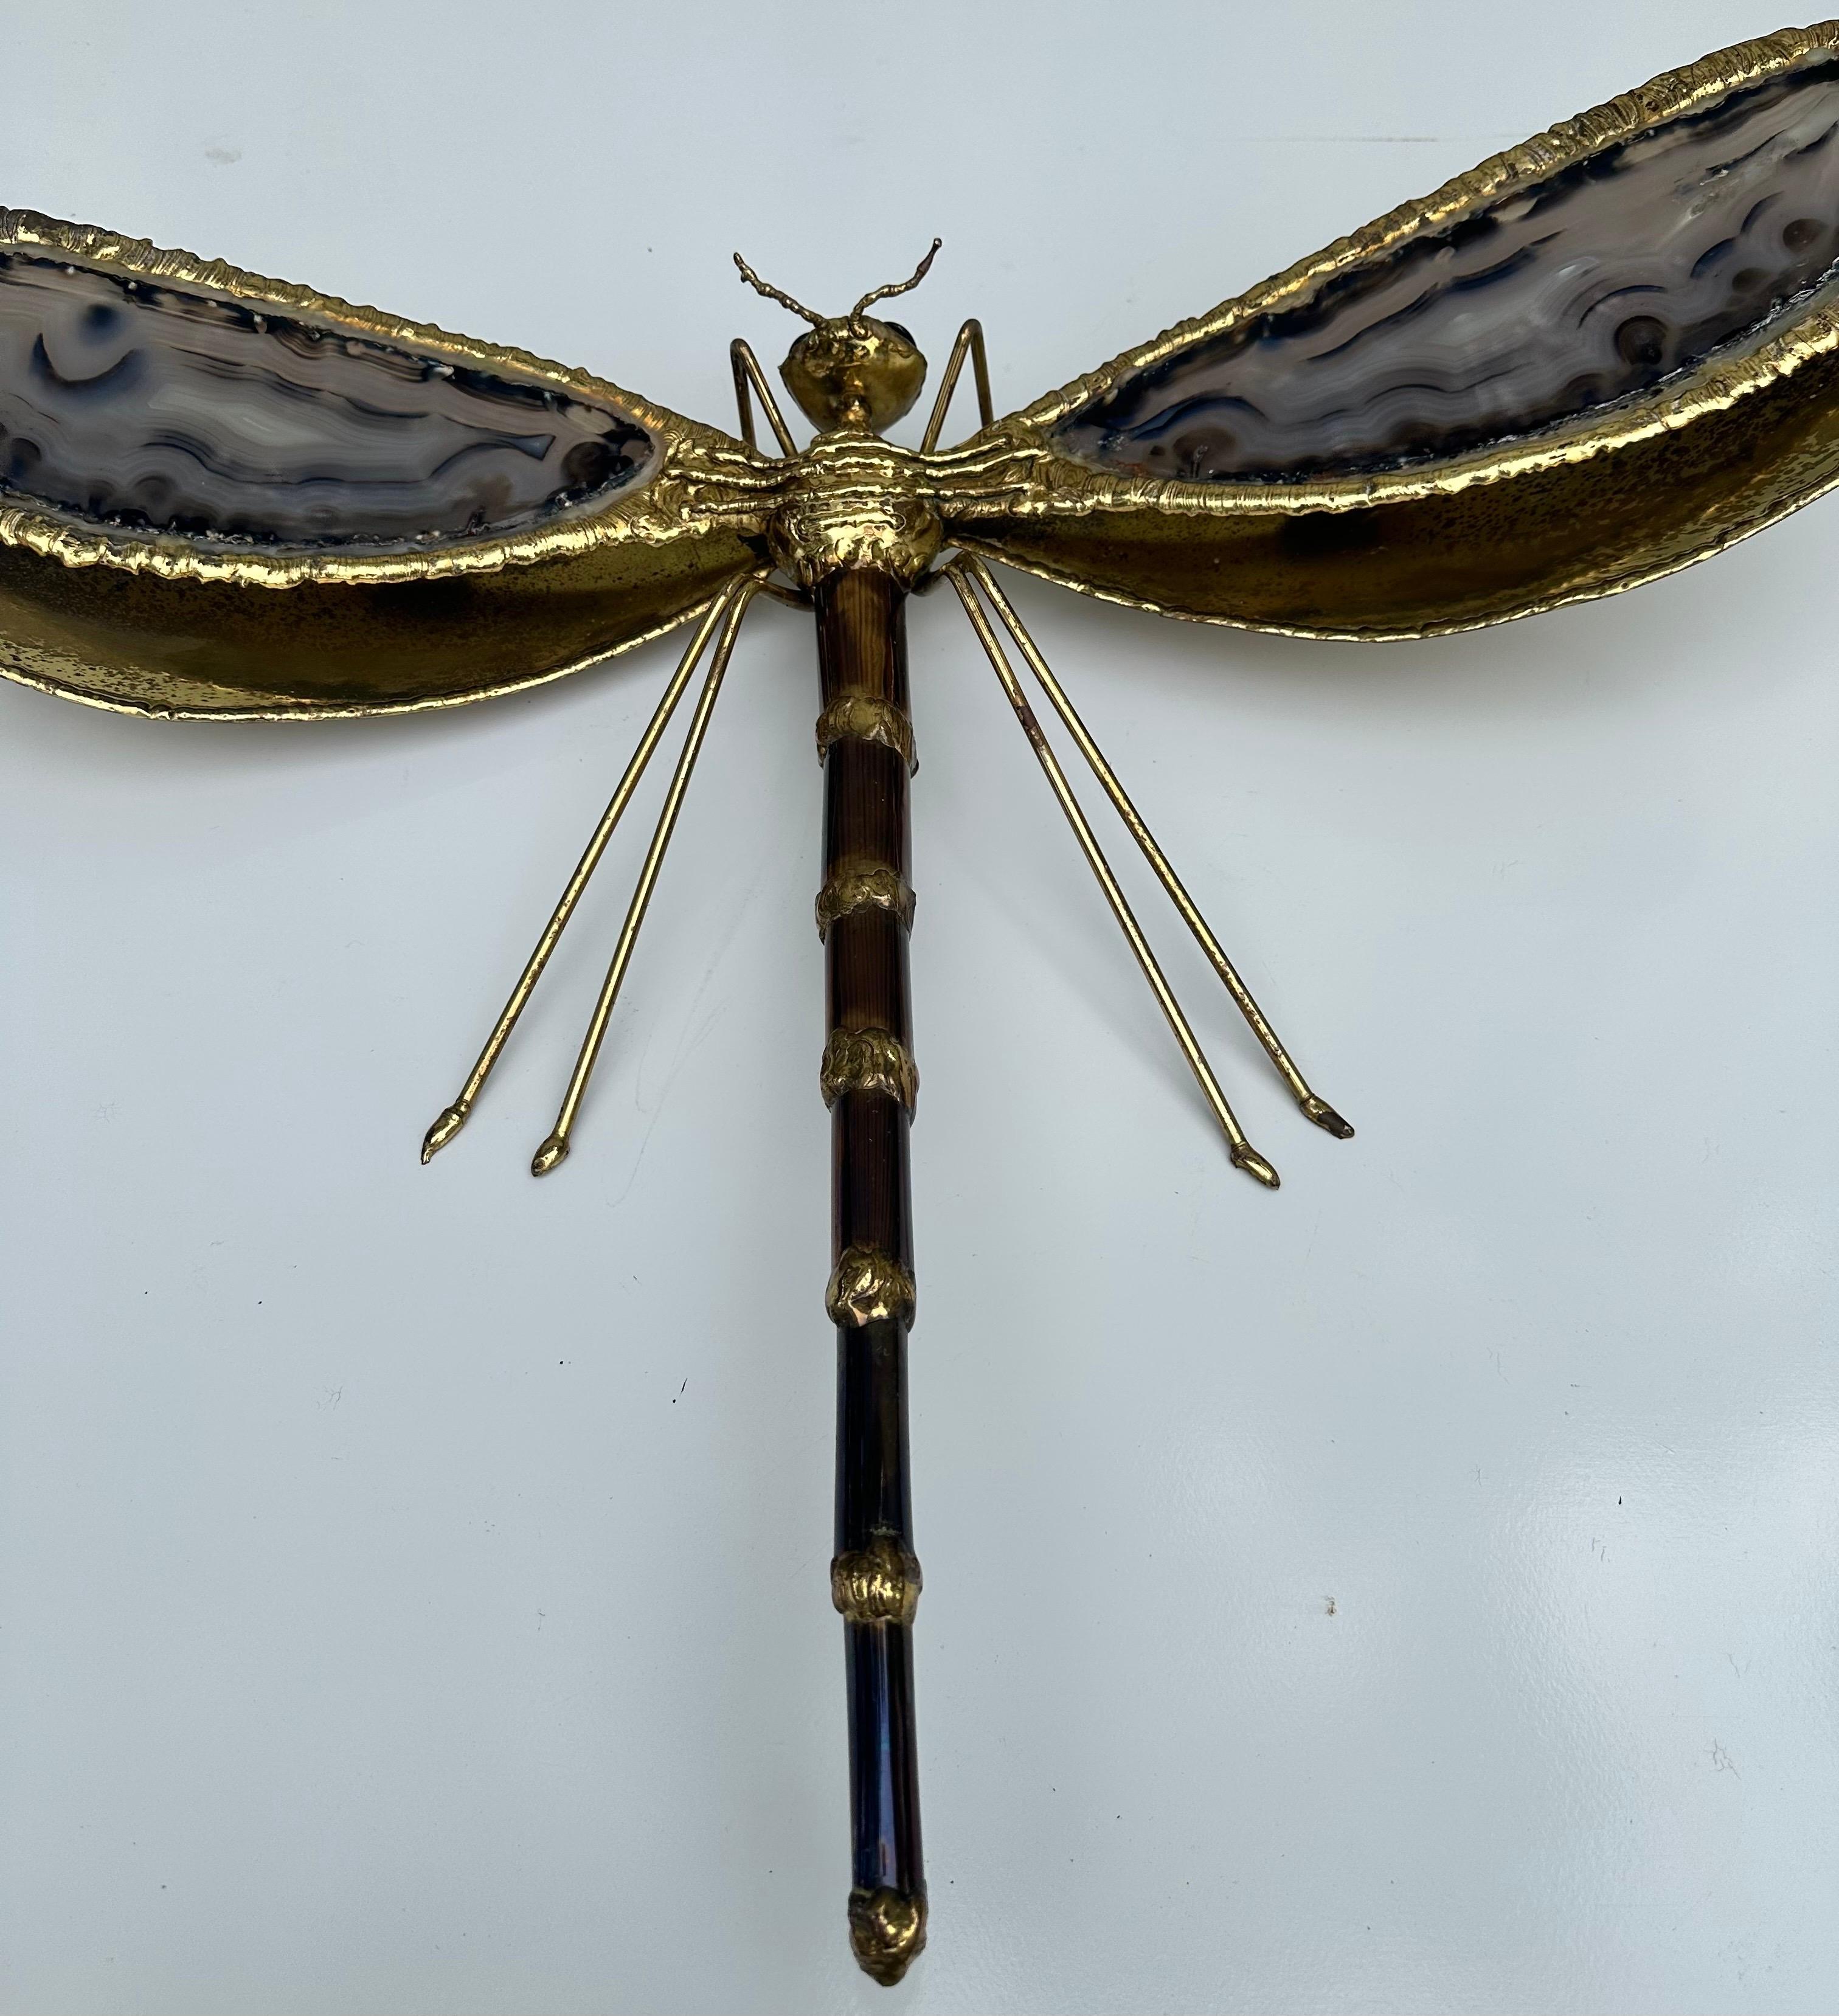 Large Duval Brasseur Dragonfly sconce.
Brass and agate stone .
2 sockets, one in each wing, 40 watts max bulb.